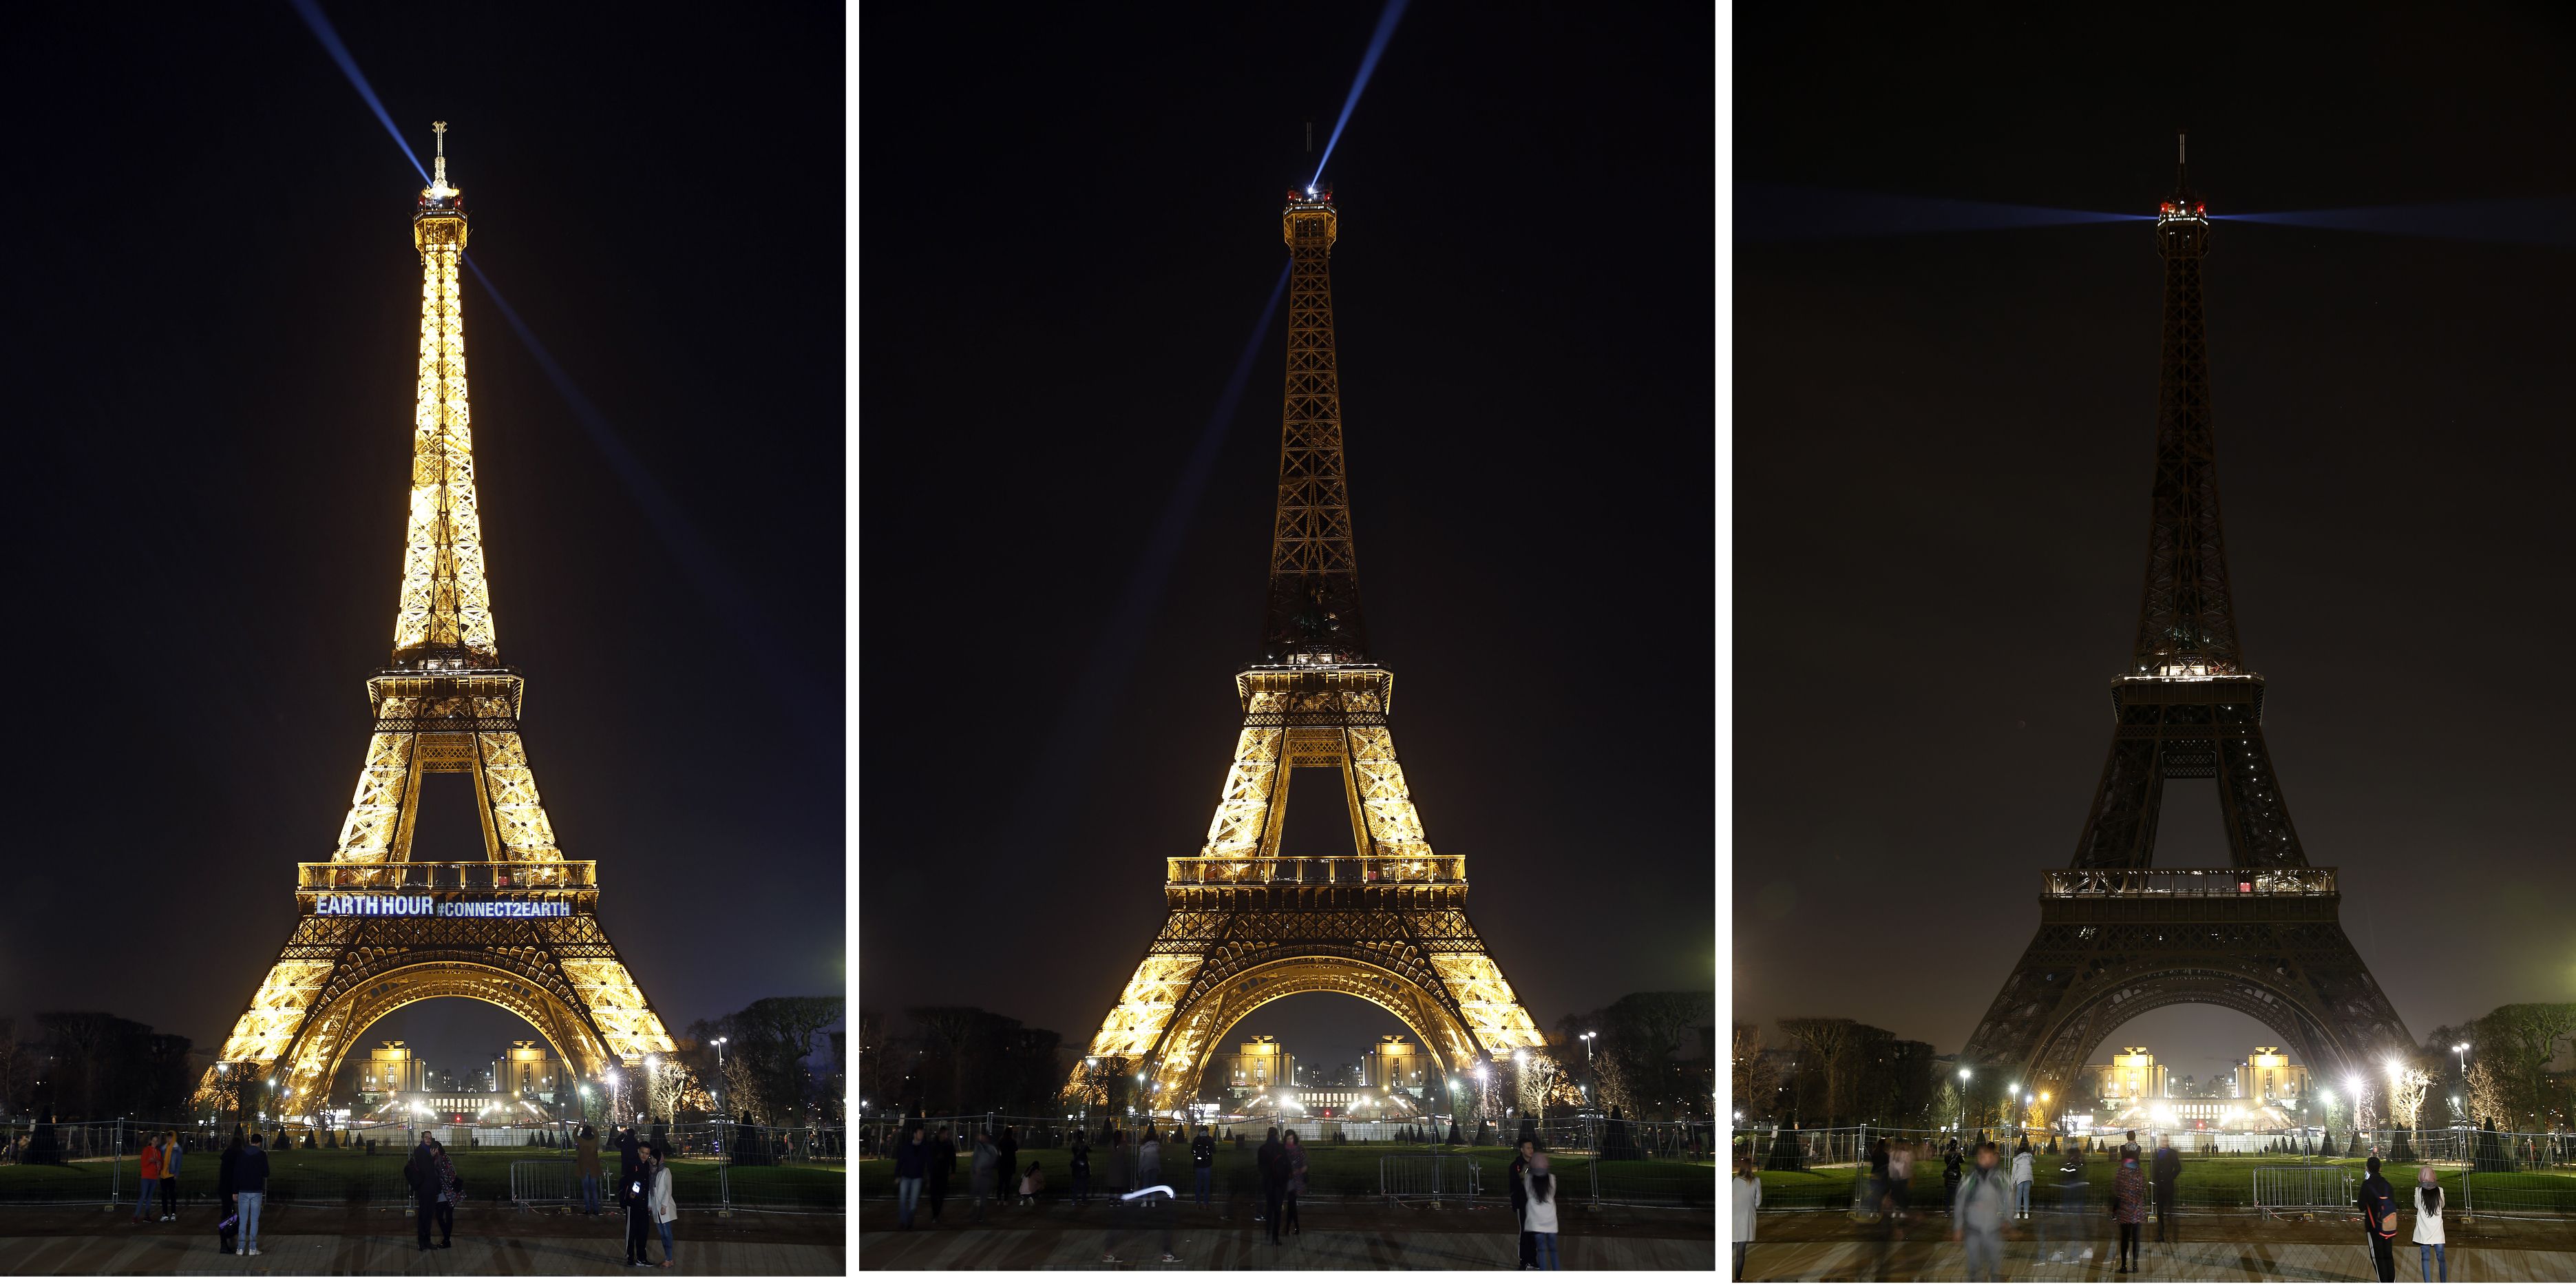 The Eiffel Tower lights go out in Paris, France.